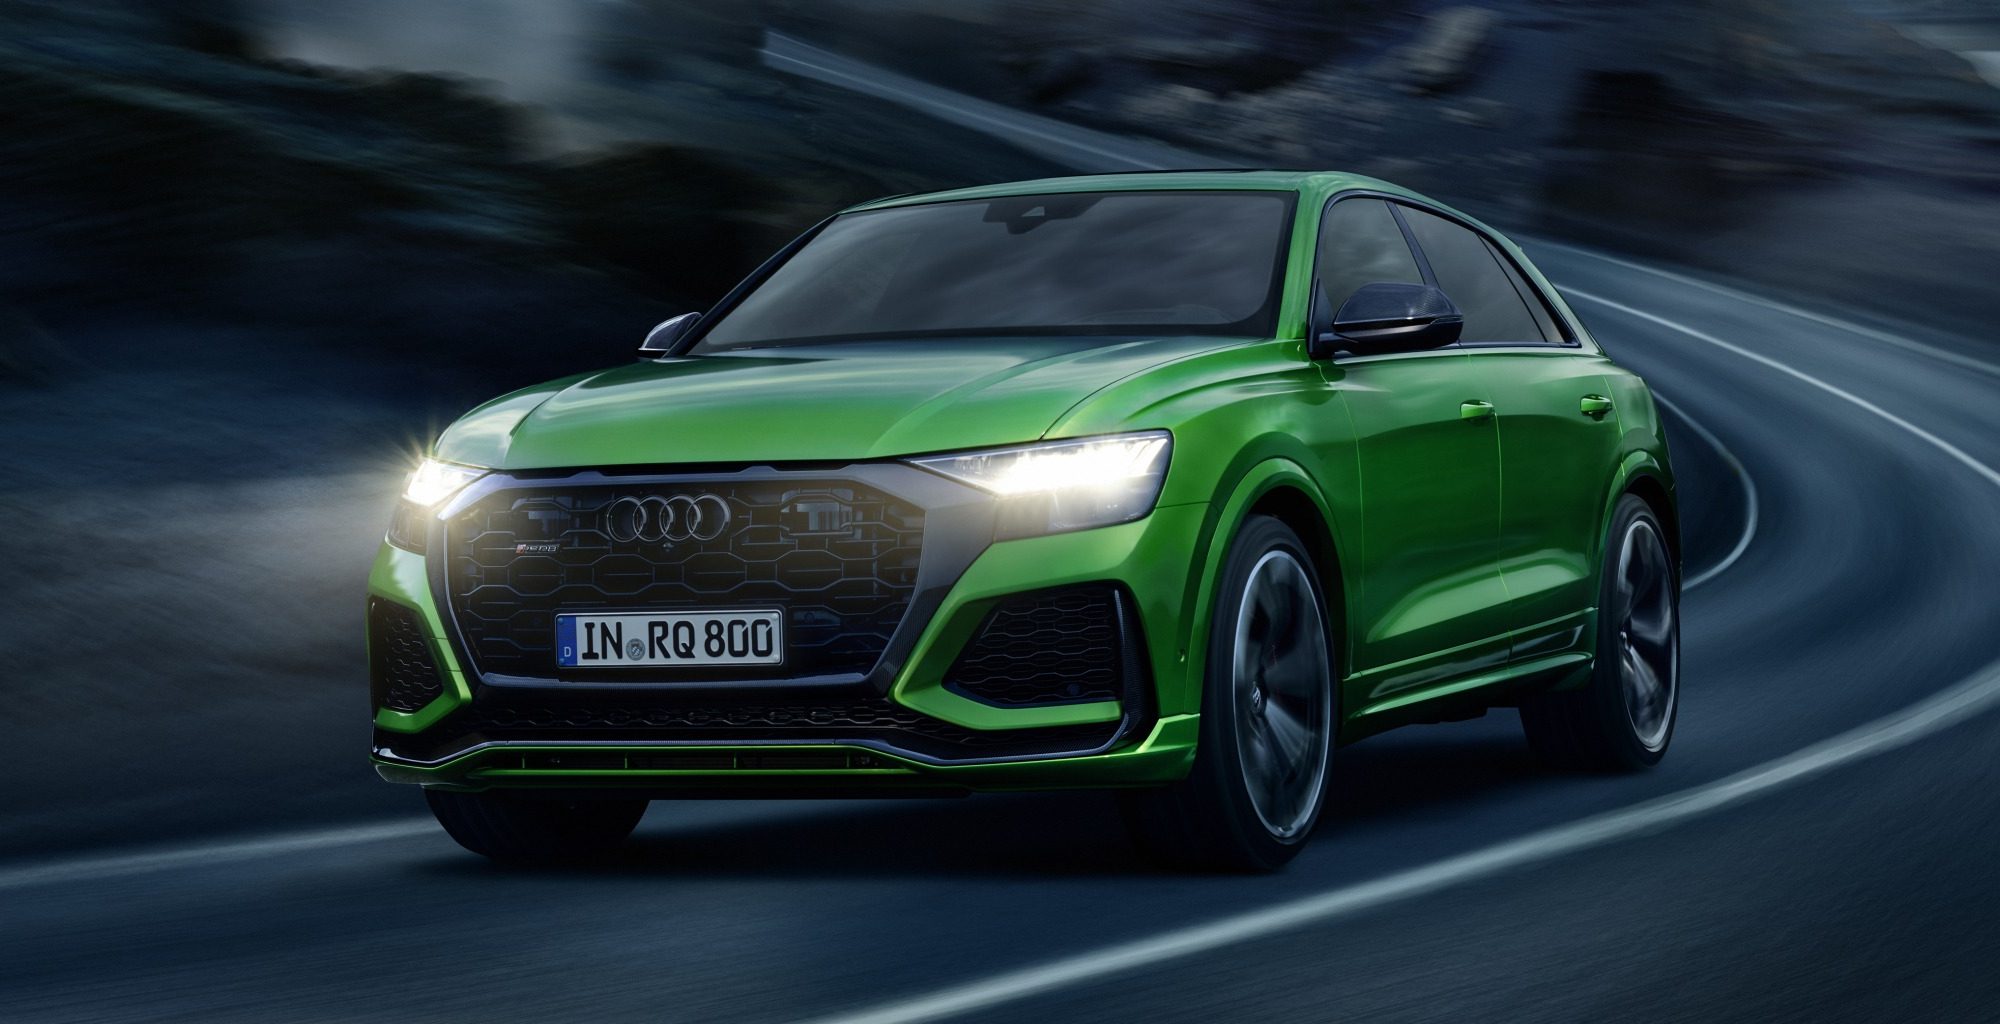 Green Audi RS Q8 driving at night time